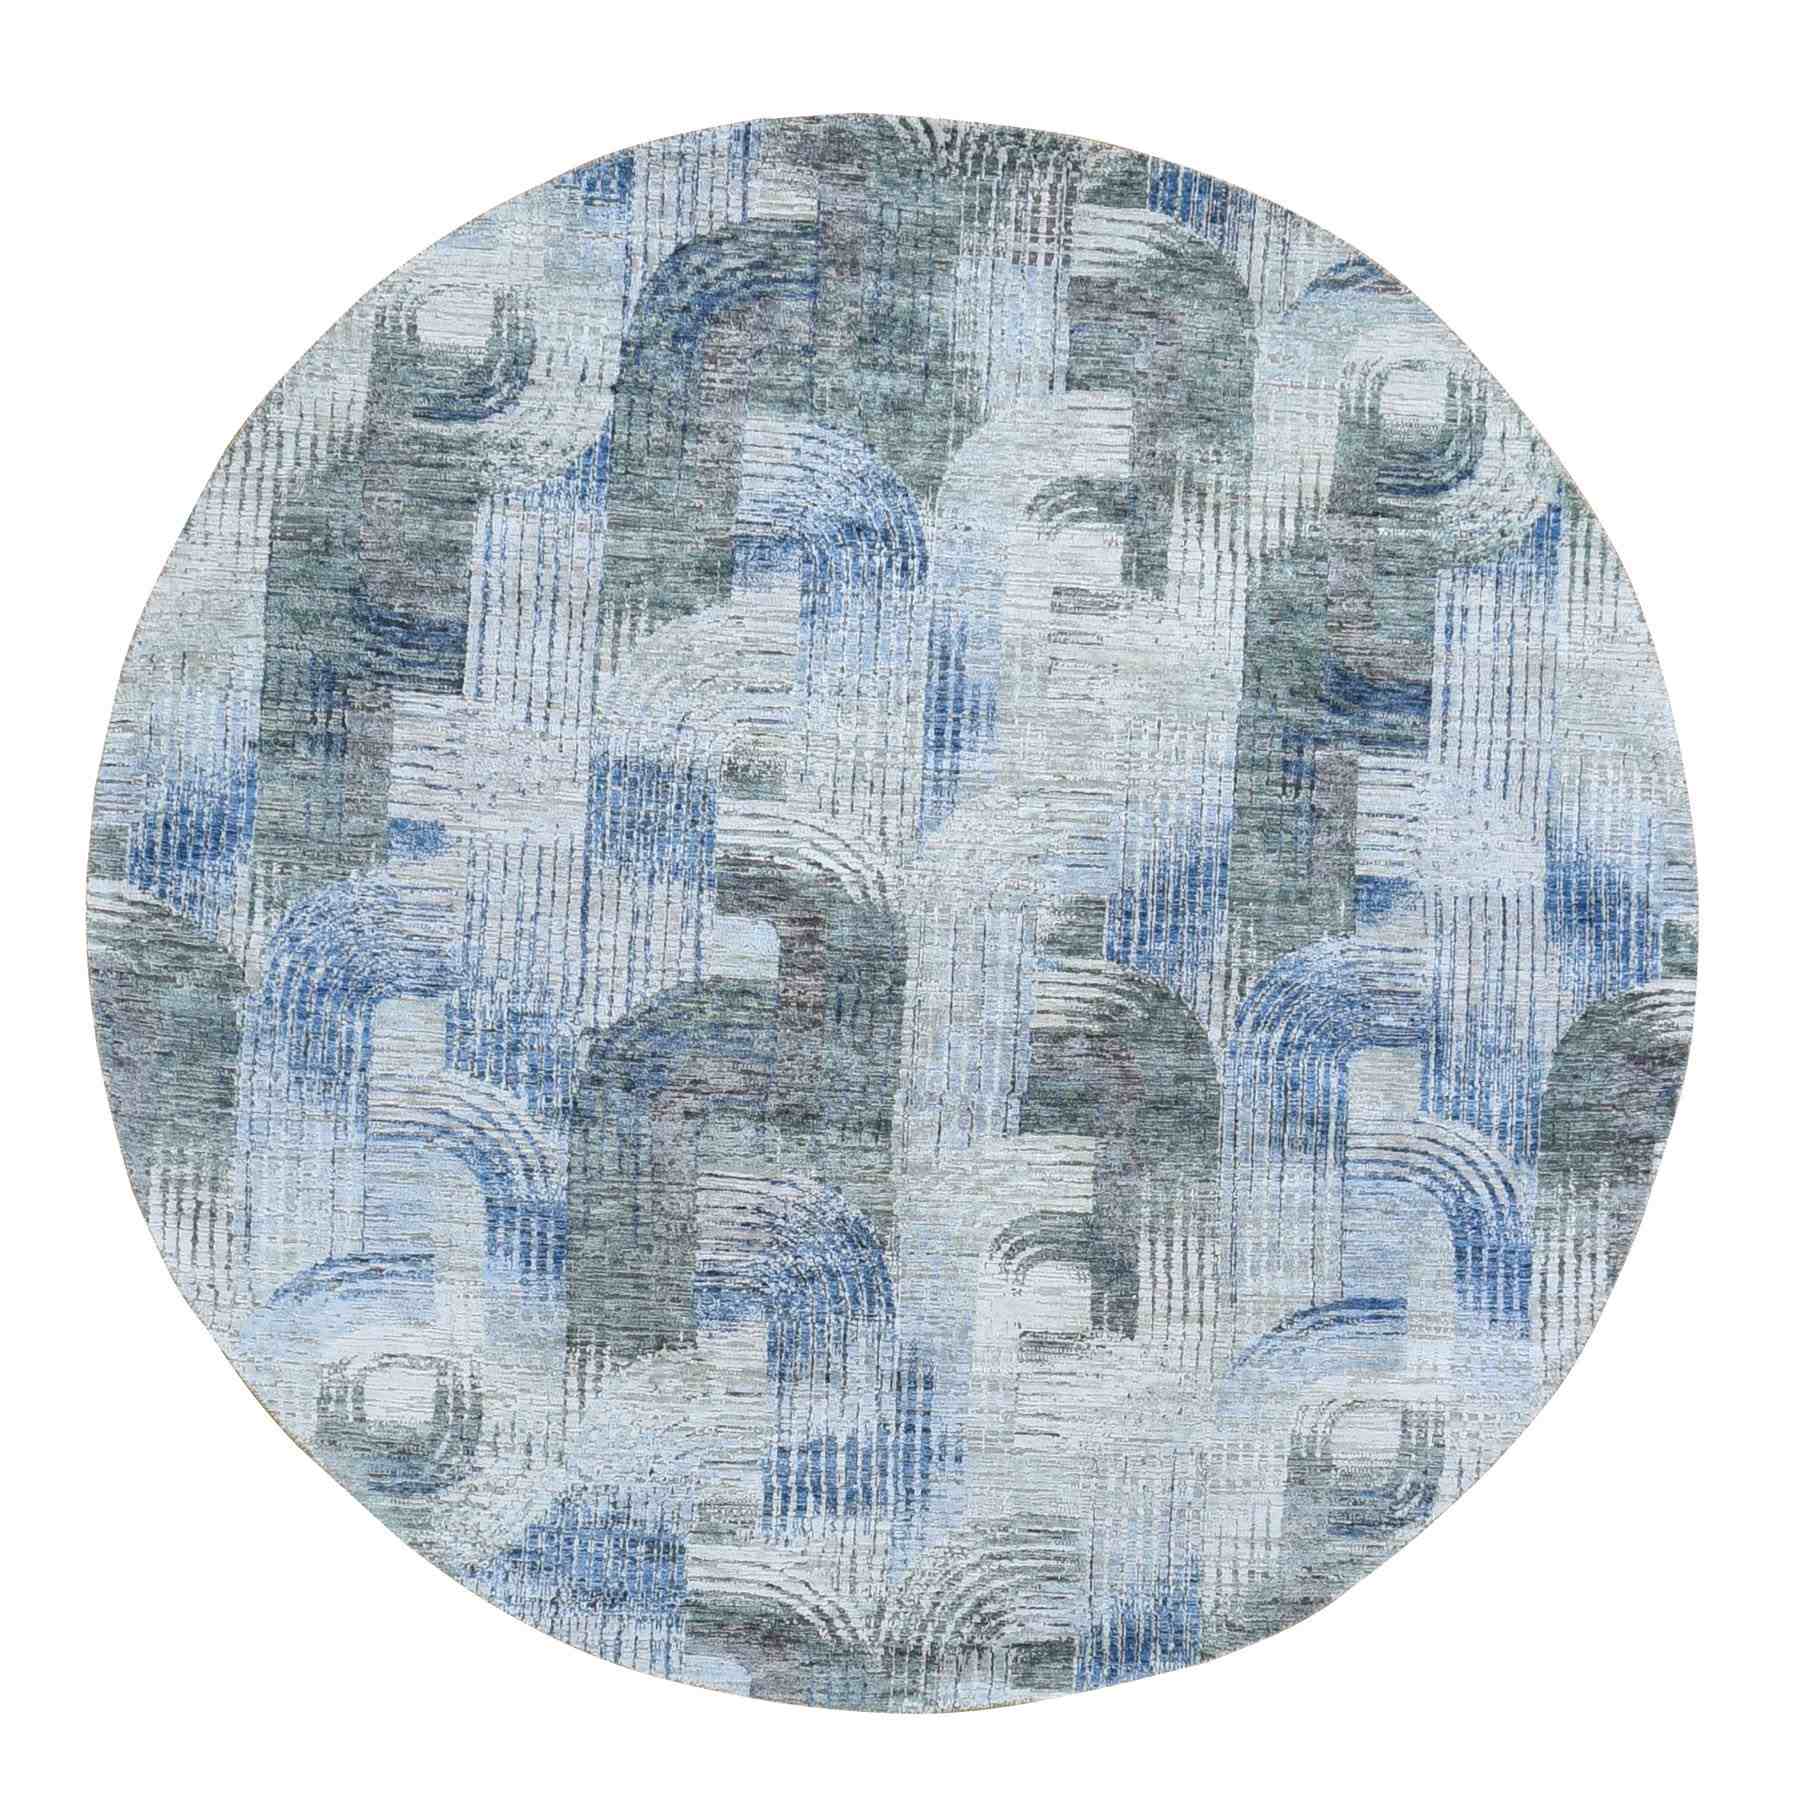 Modern-and-Contemporary-Hand-Knotted-Rug-295780